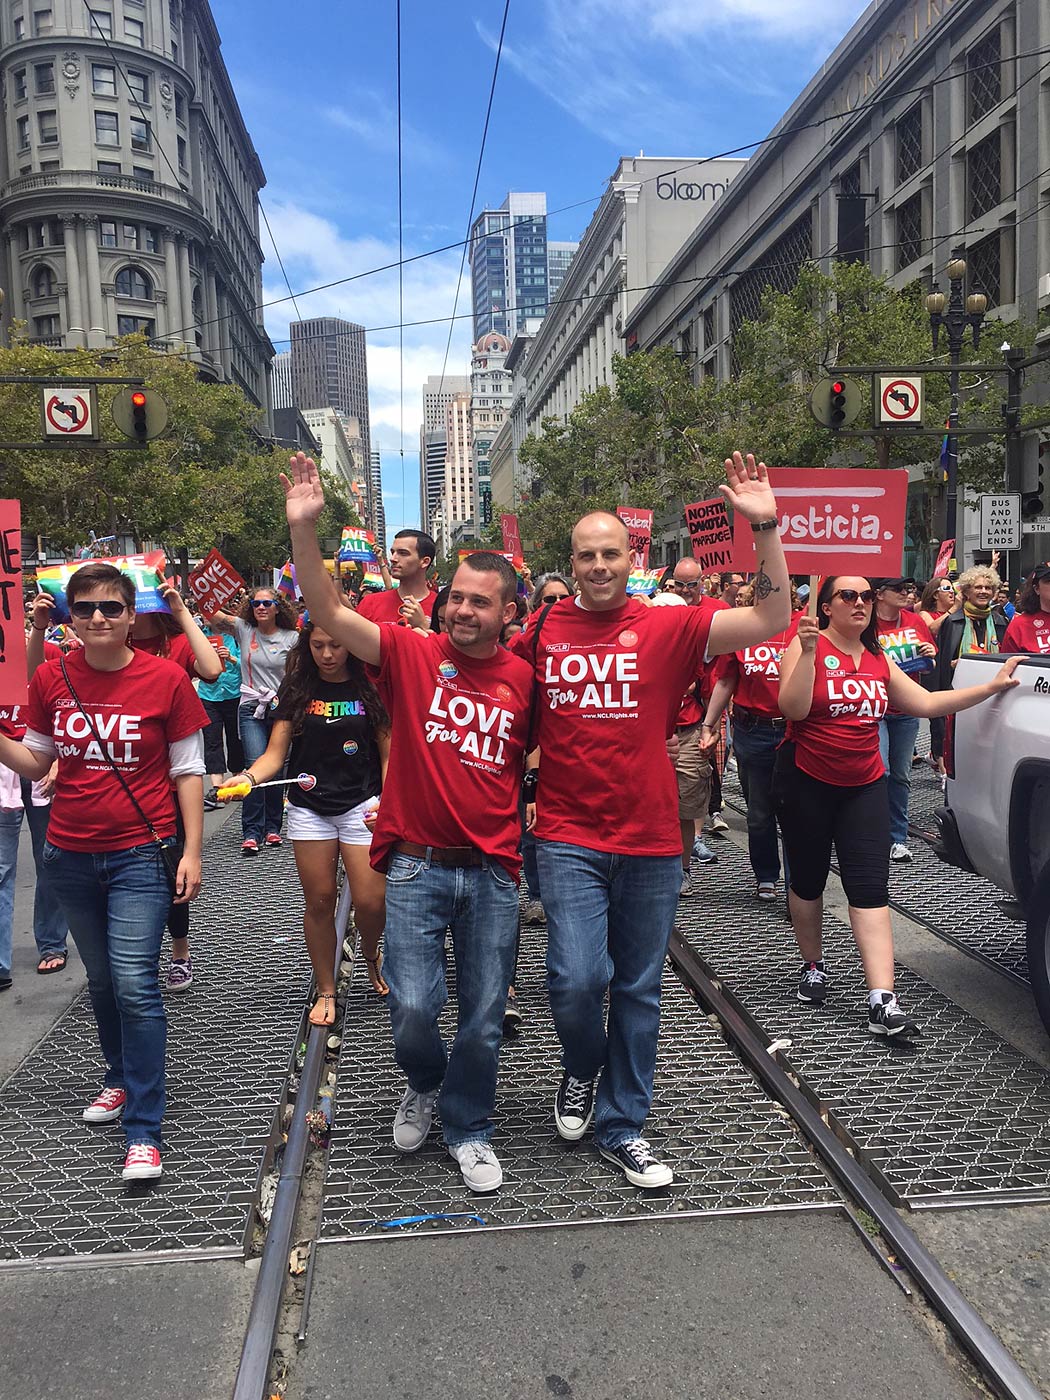 Plaintiffs Thom Kostura (left) and his husband Ijpe DeKoe (right) march in the gay pride parade in San Francisco on June 28, 2015. (Courtesy Thom Kostura)